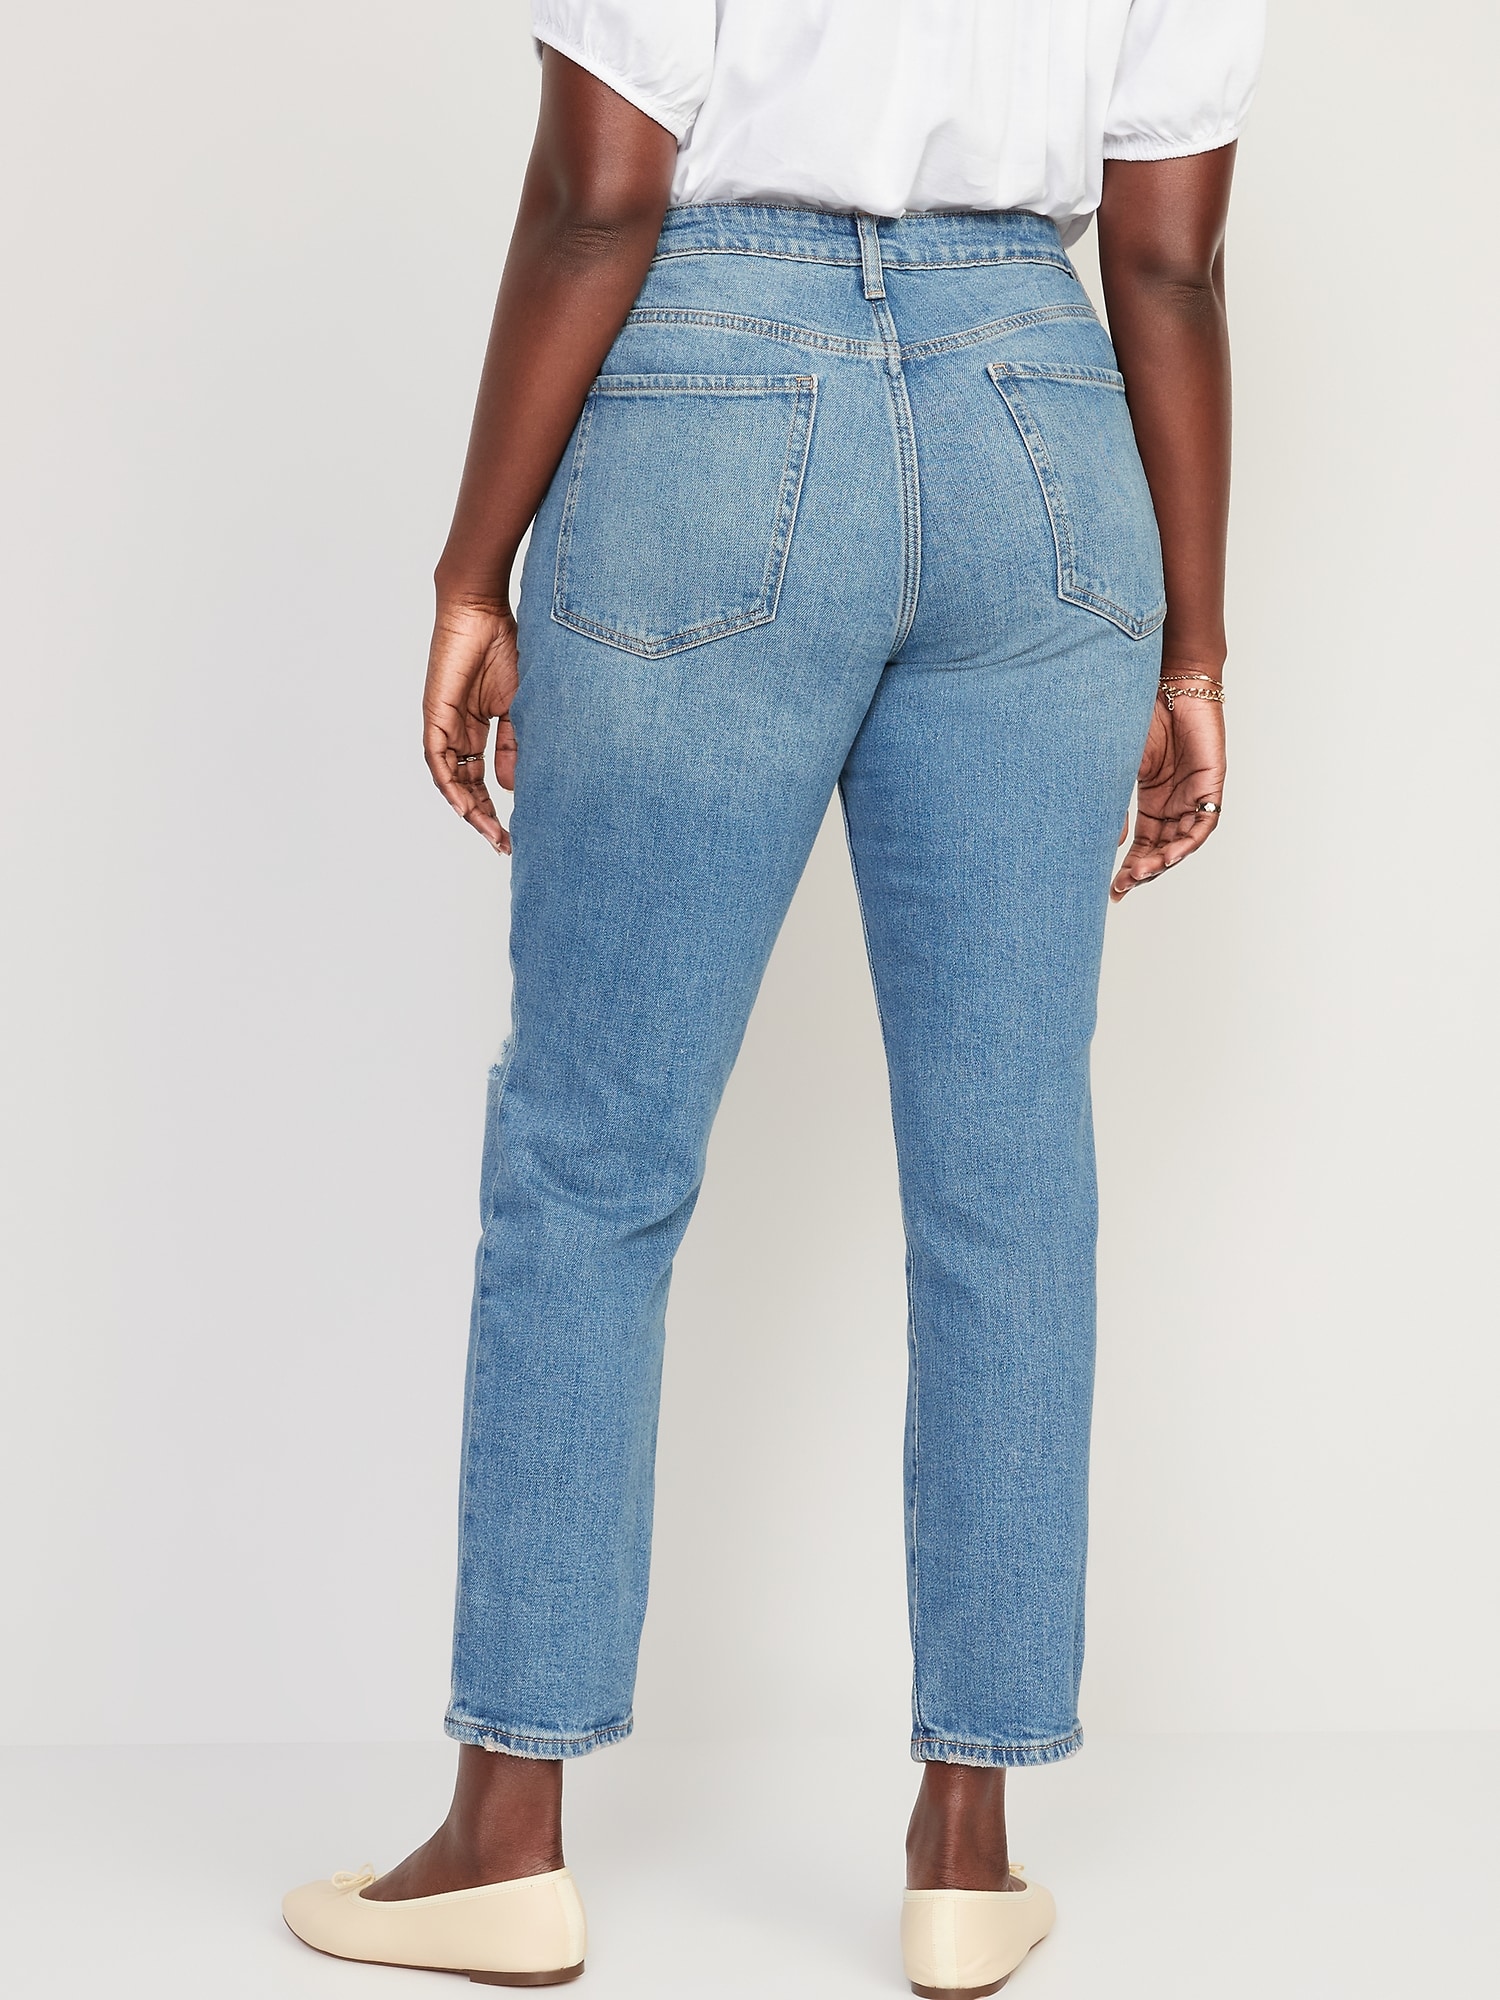 High-Waisted OG Straight Ripped Ankle Jeans for Women | Old Navy